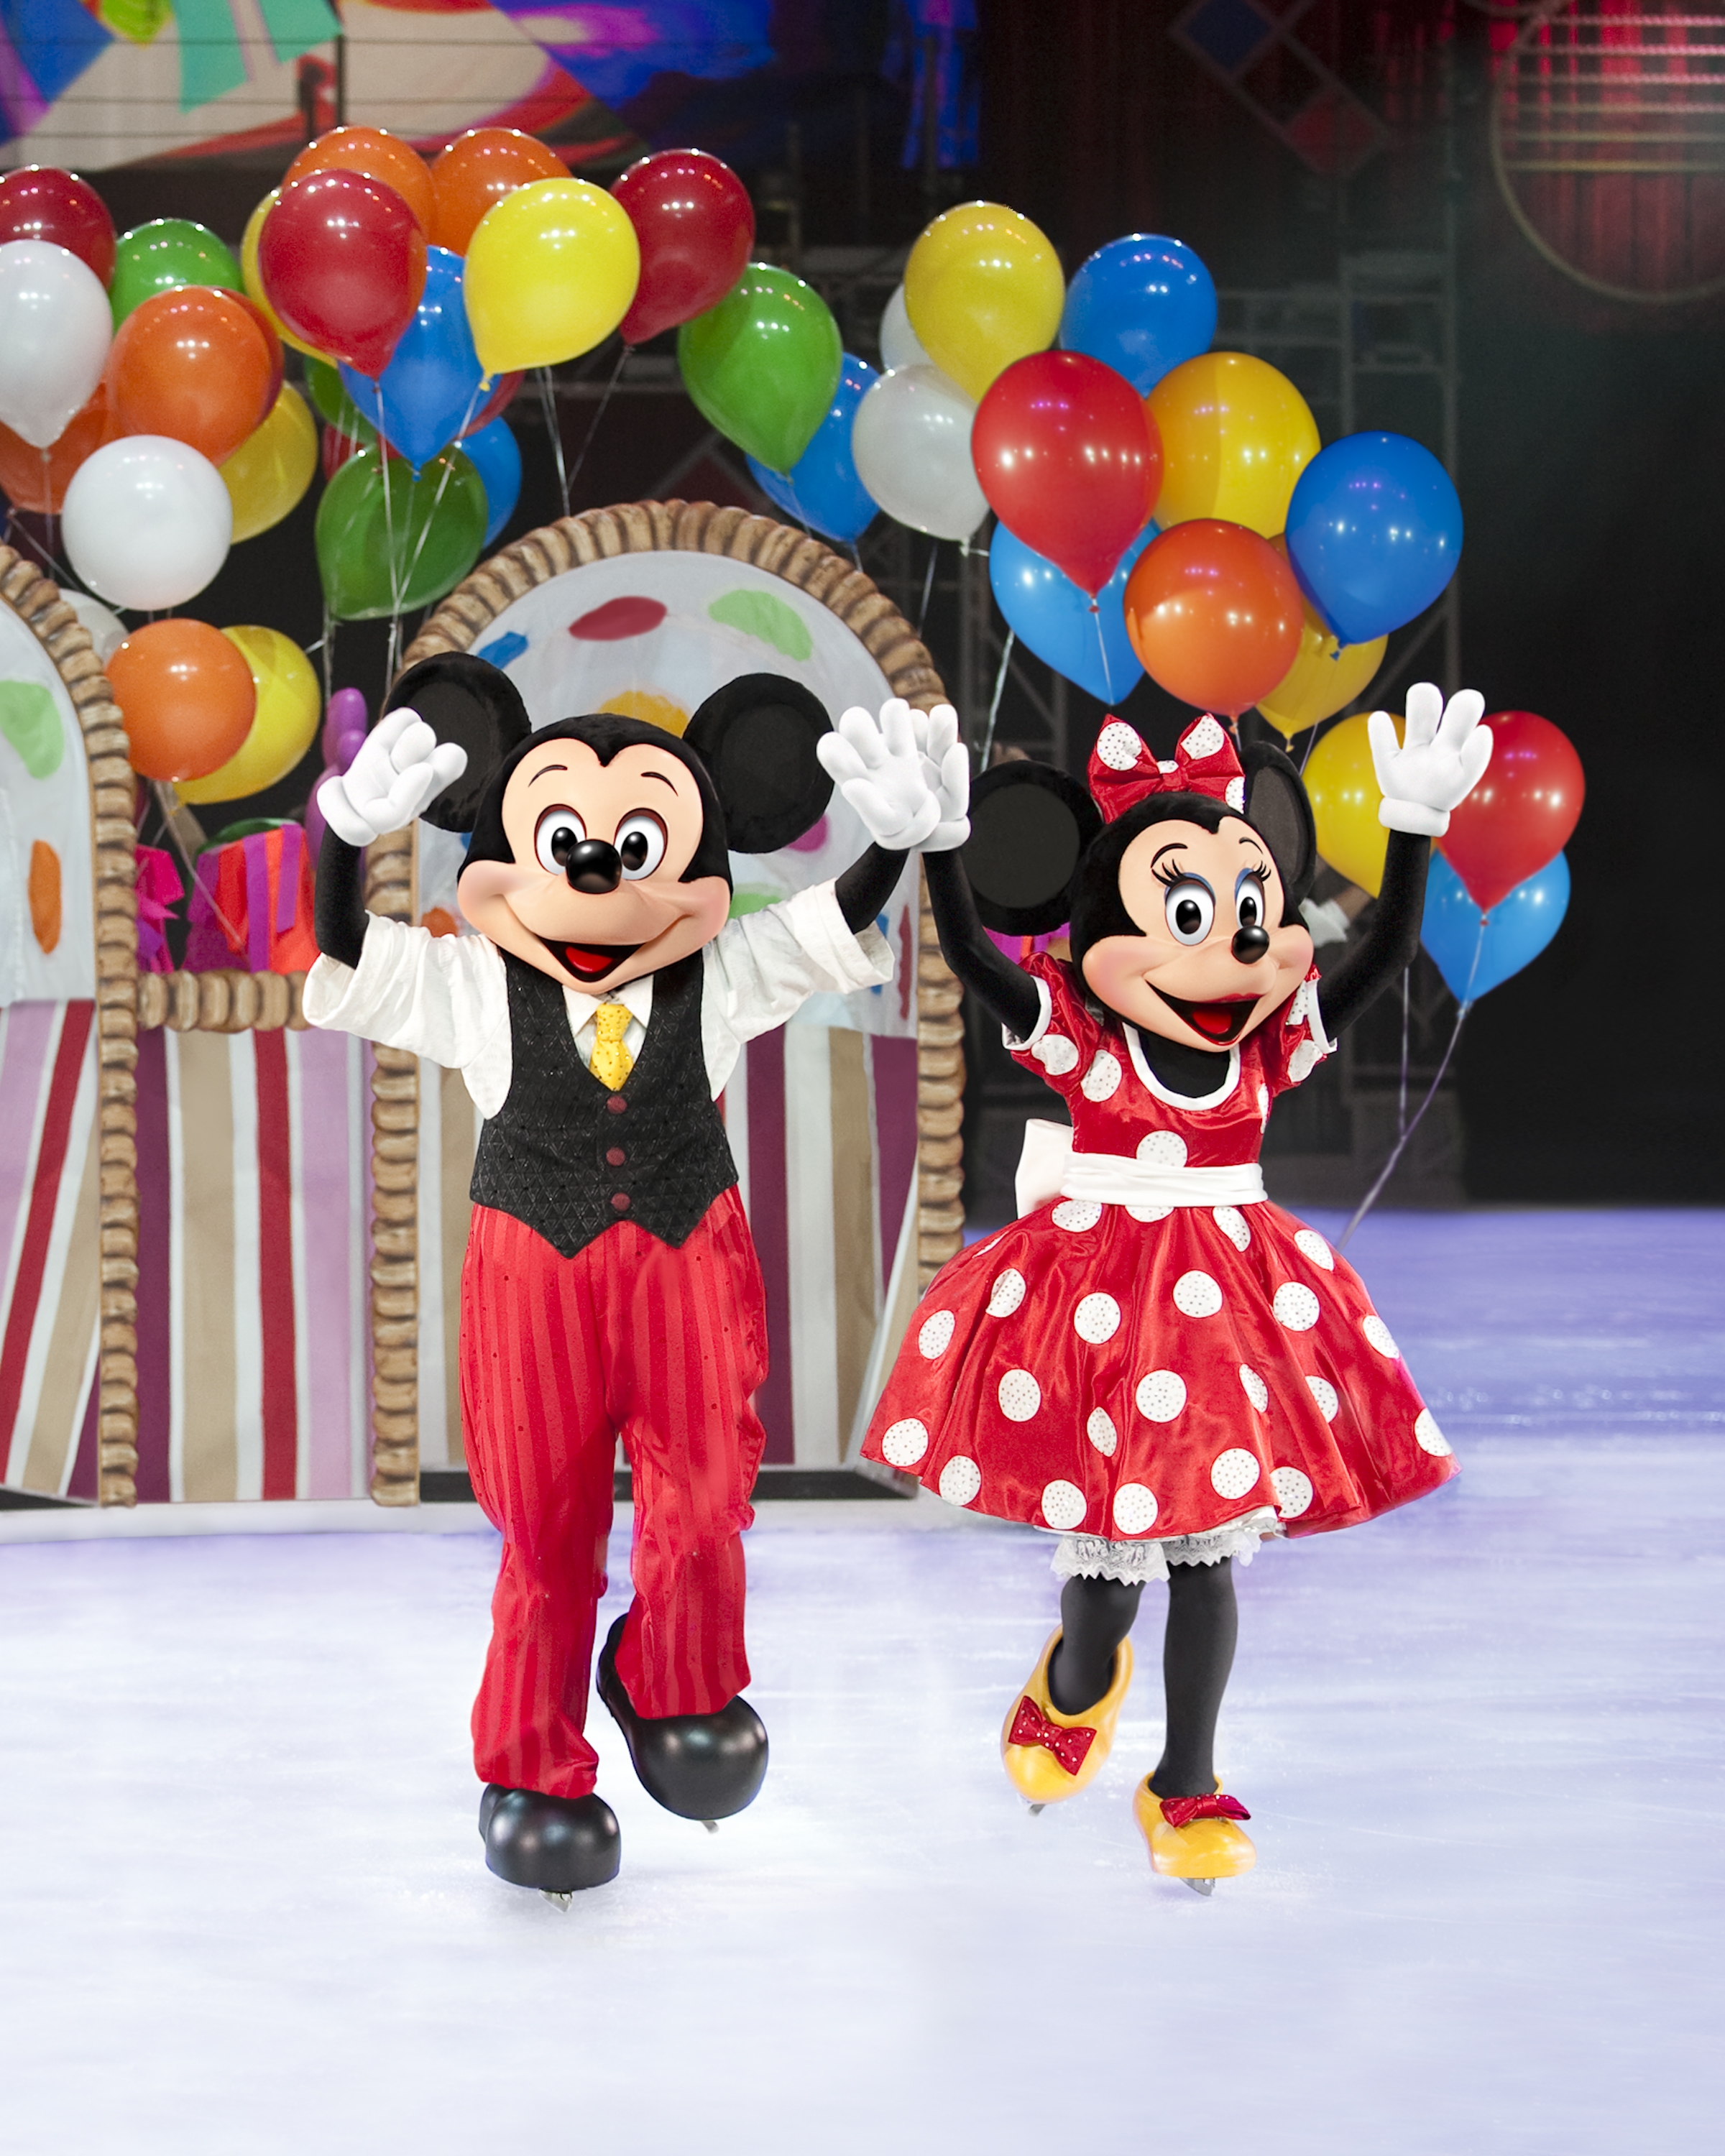 Disney On Ice Lets Party at the Birmingham LG Arena in February 2013